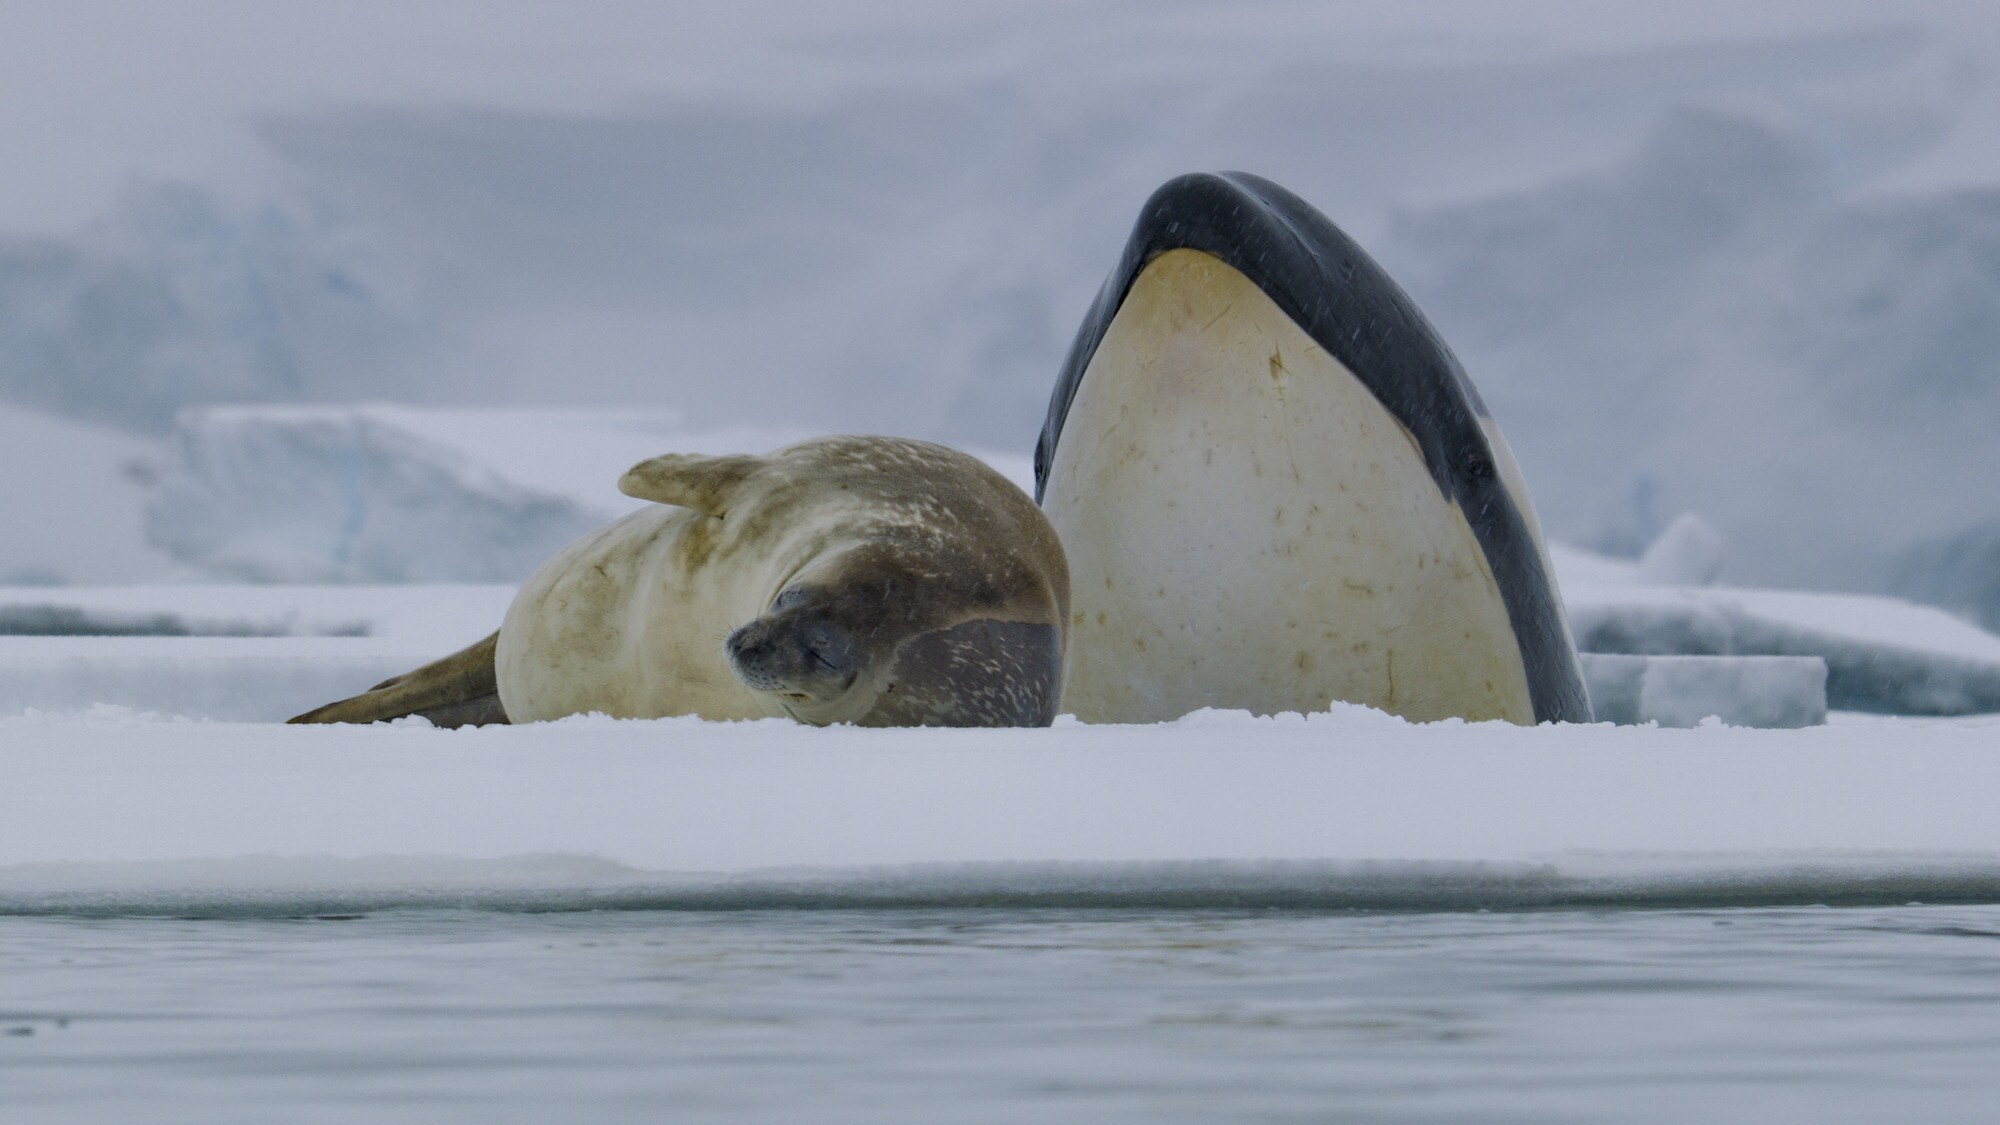 A killer whale pops up behind a Crabeater Seal lying on the ice.  (credit: National Geographic for Disney+/Tom Walker)